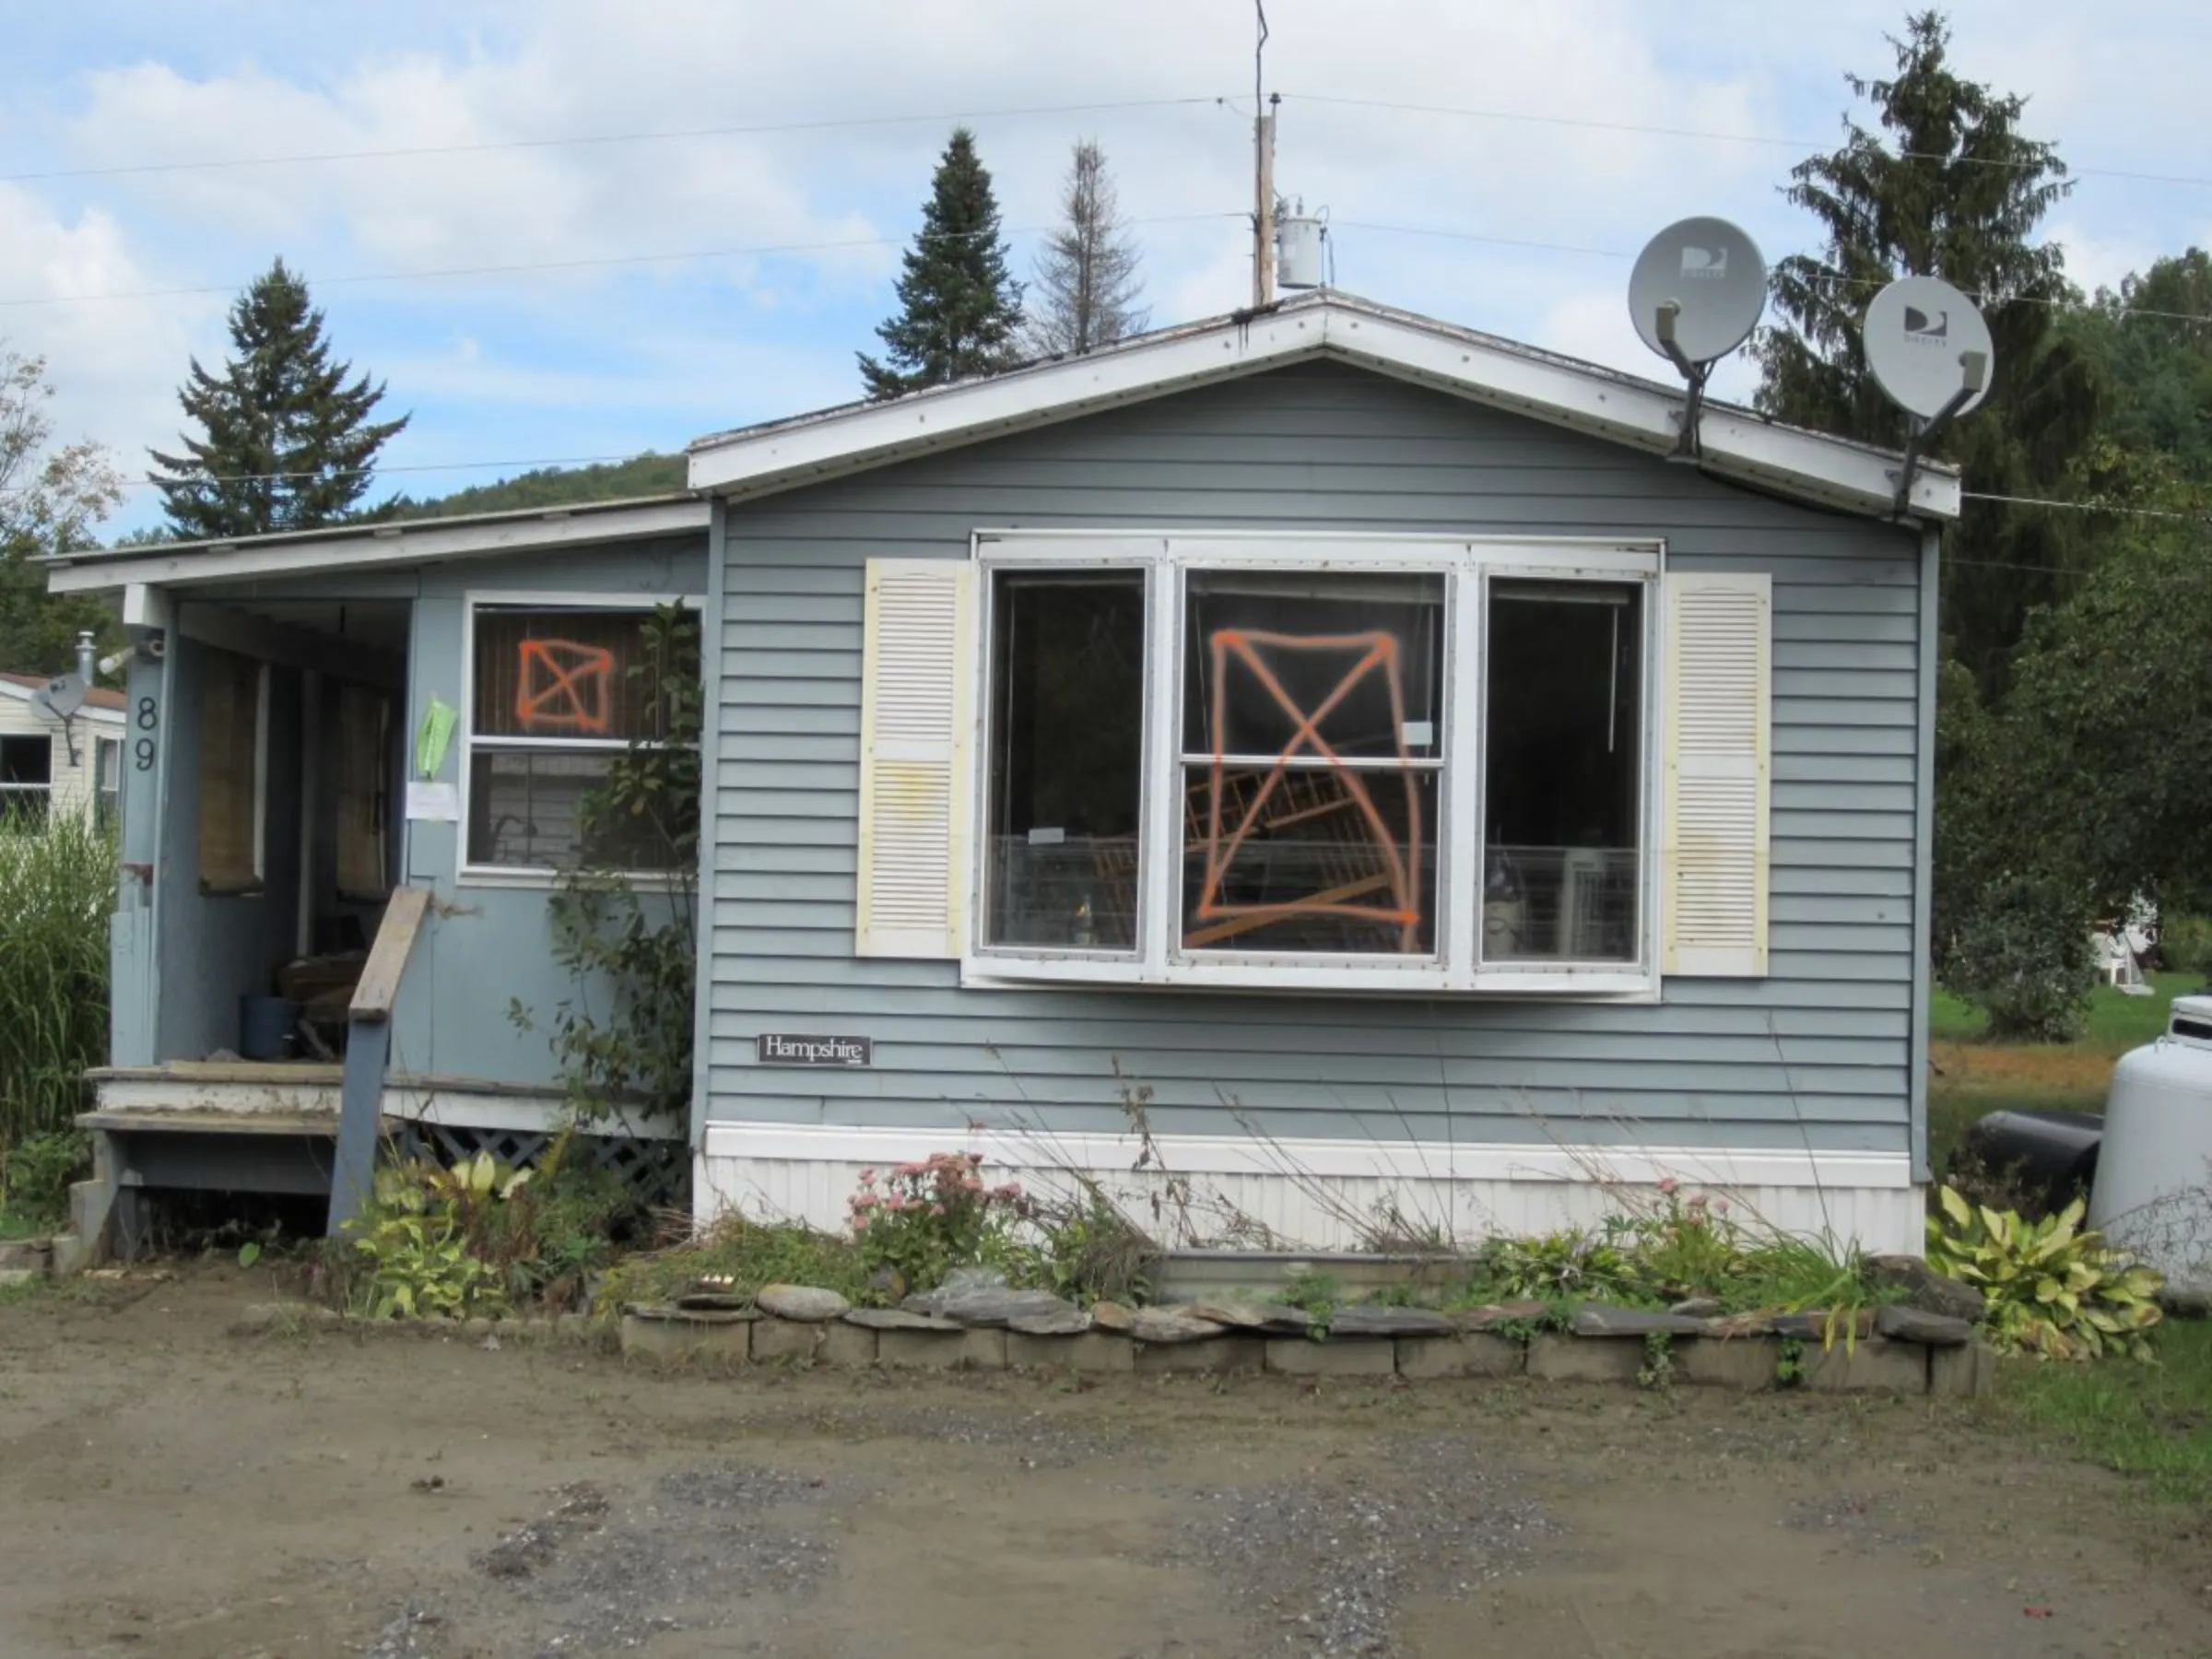 A flooded home in a mobile home park in Berlin, Vermont, after Tropical Story Irene in September 2011